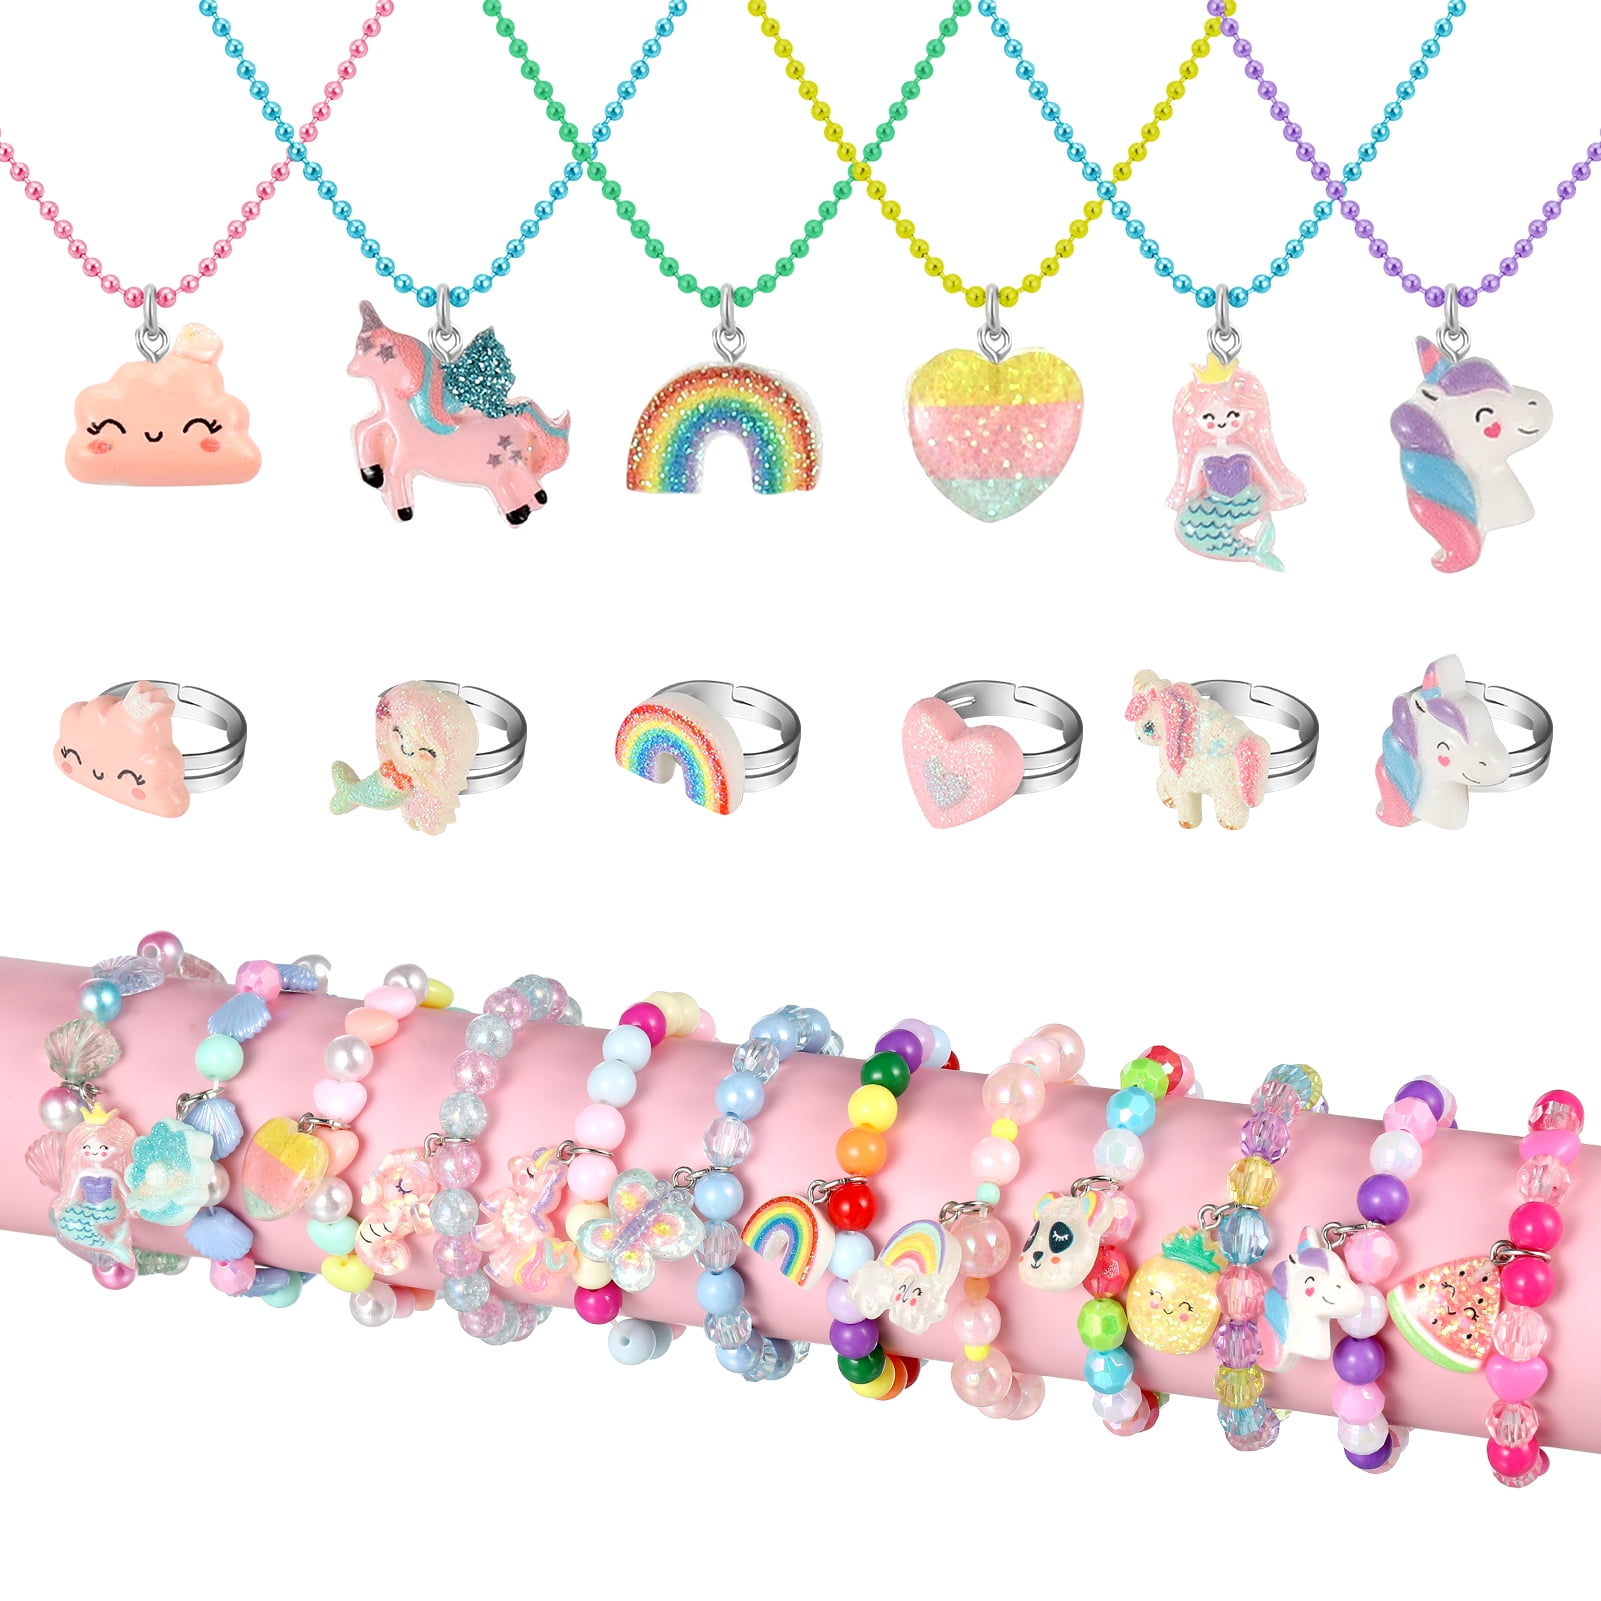 G.C 12 Pcs Necklaces Bracelets Set with Cute Mermaid Unicorn Heart Star Rainbow Charms Kids Gift Toy Party Favors Pretend Play Dress Up Colorful